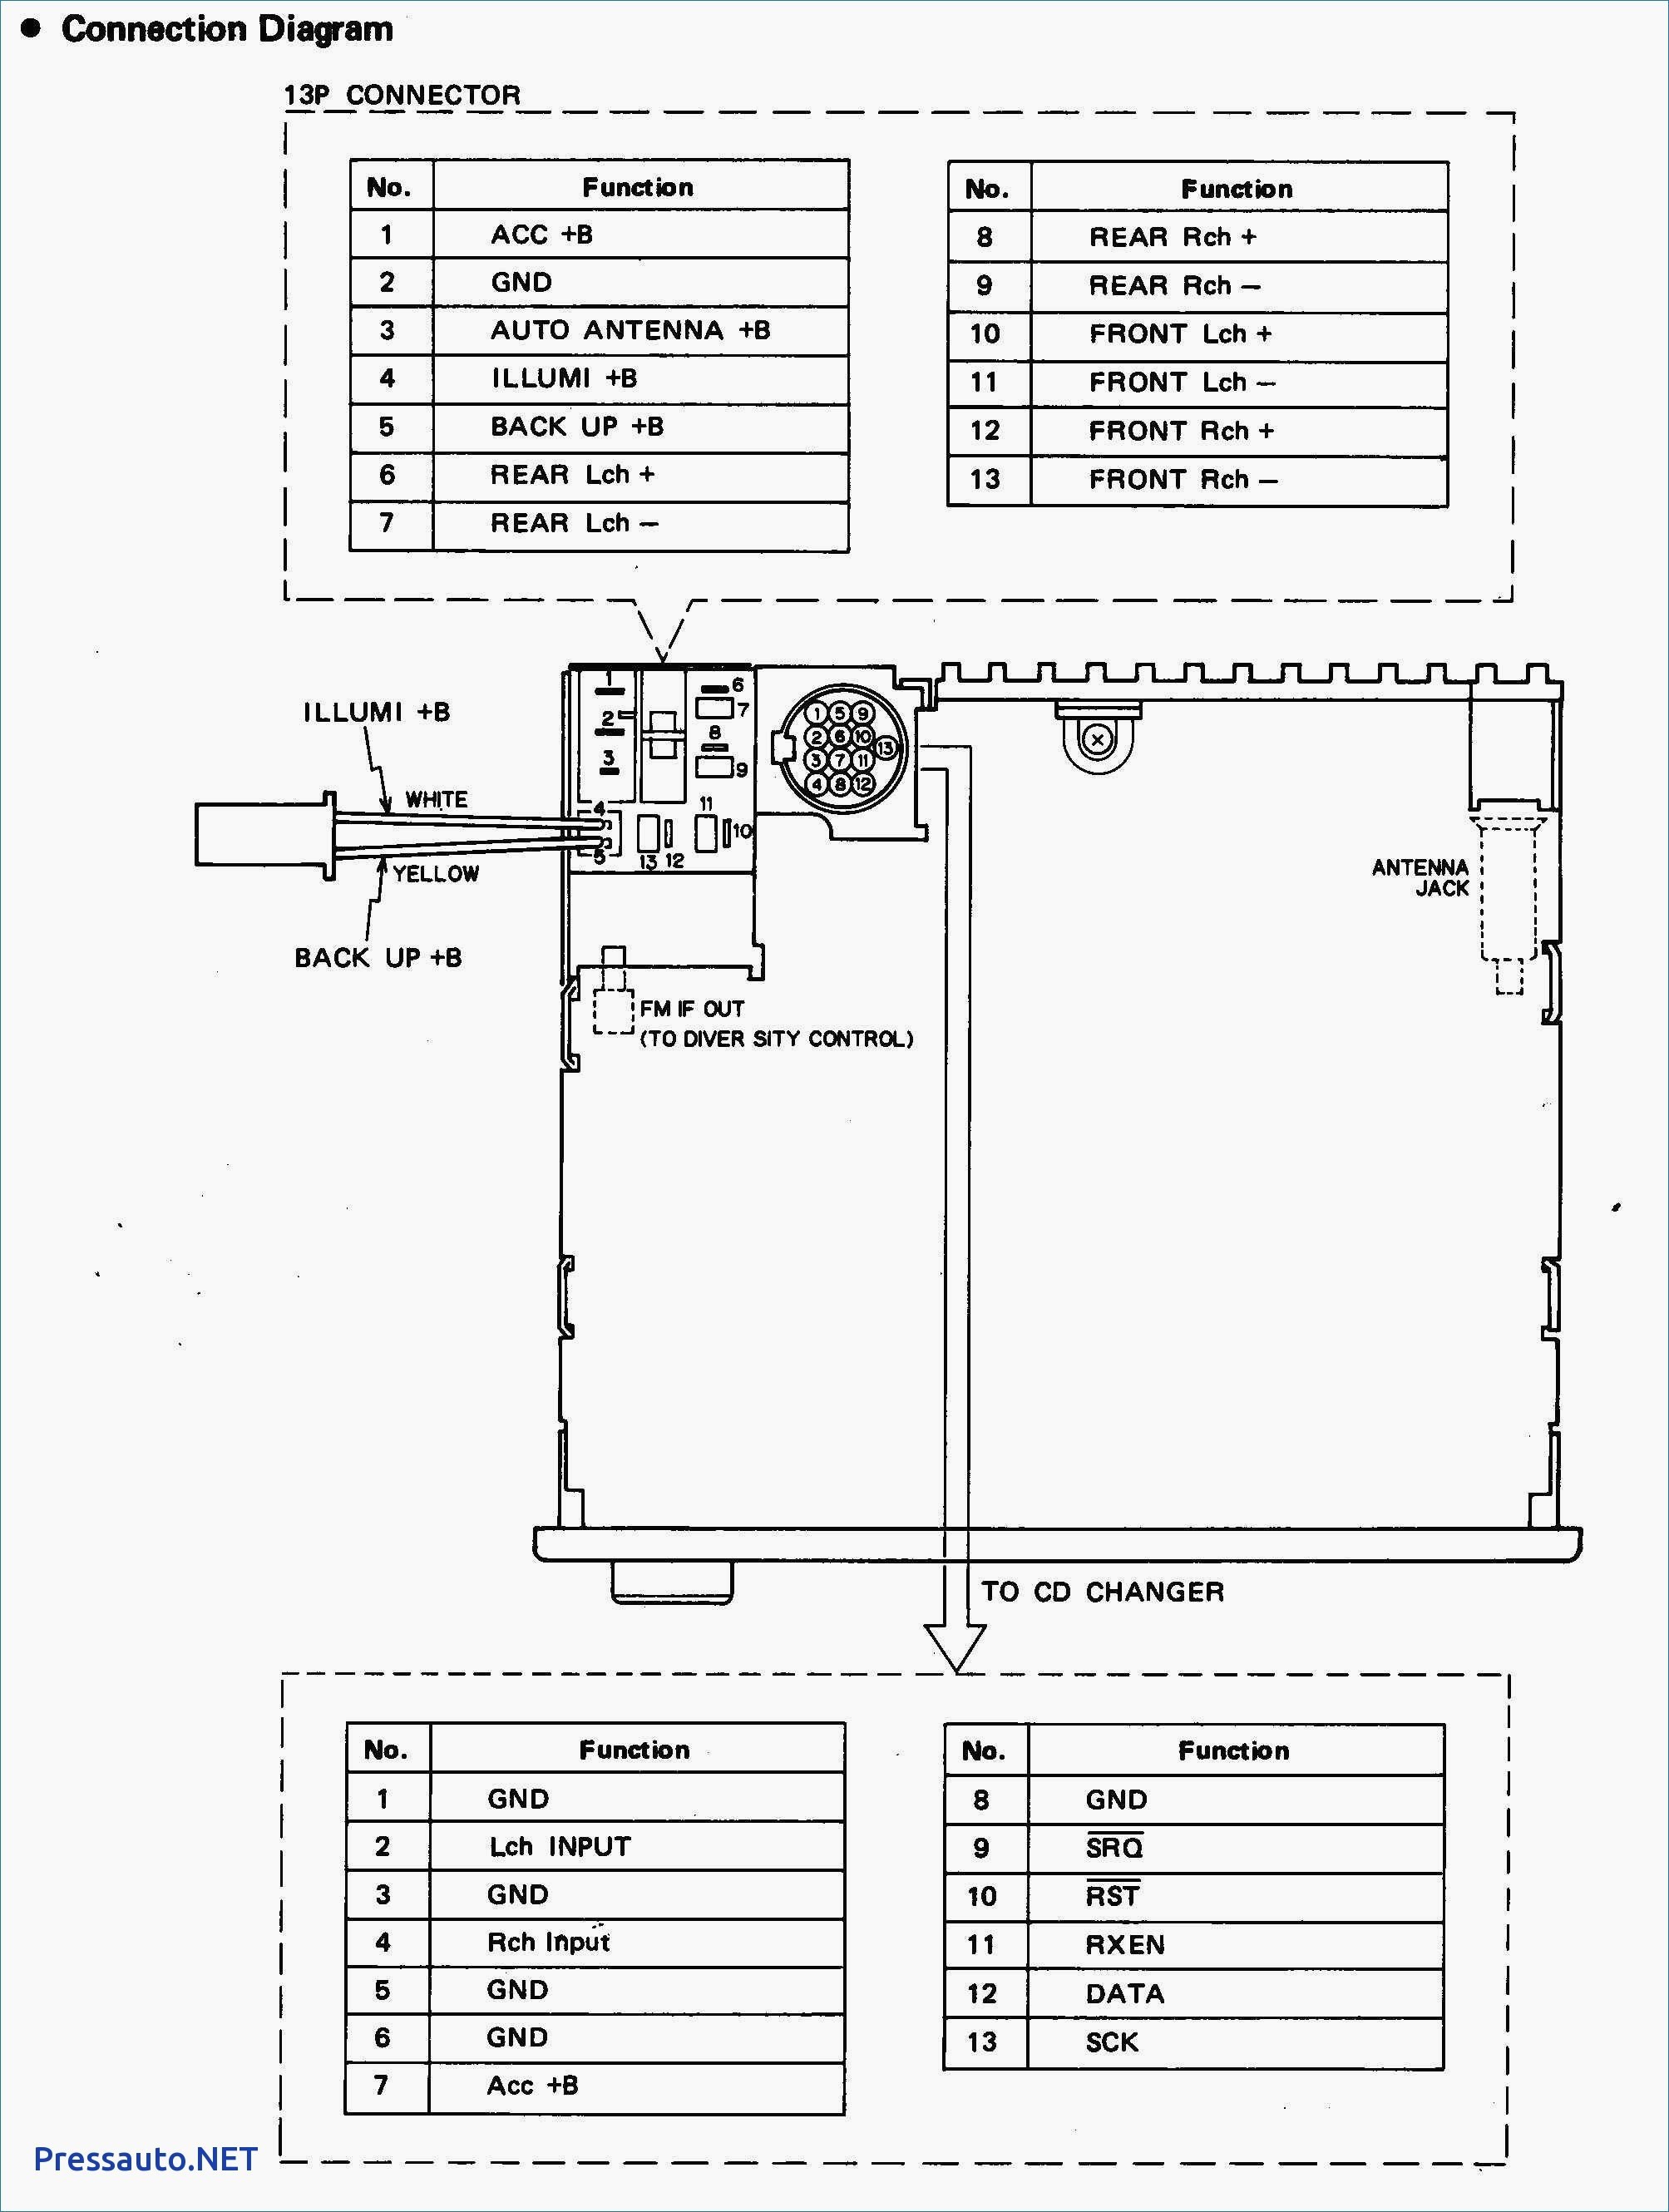 Clarion Wiring Diagram for Car Stereo Valid Modern Clarion Car Stereo Wiring Diagram Bmw X5 Sketch